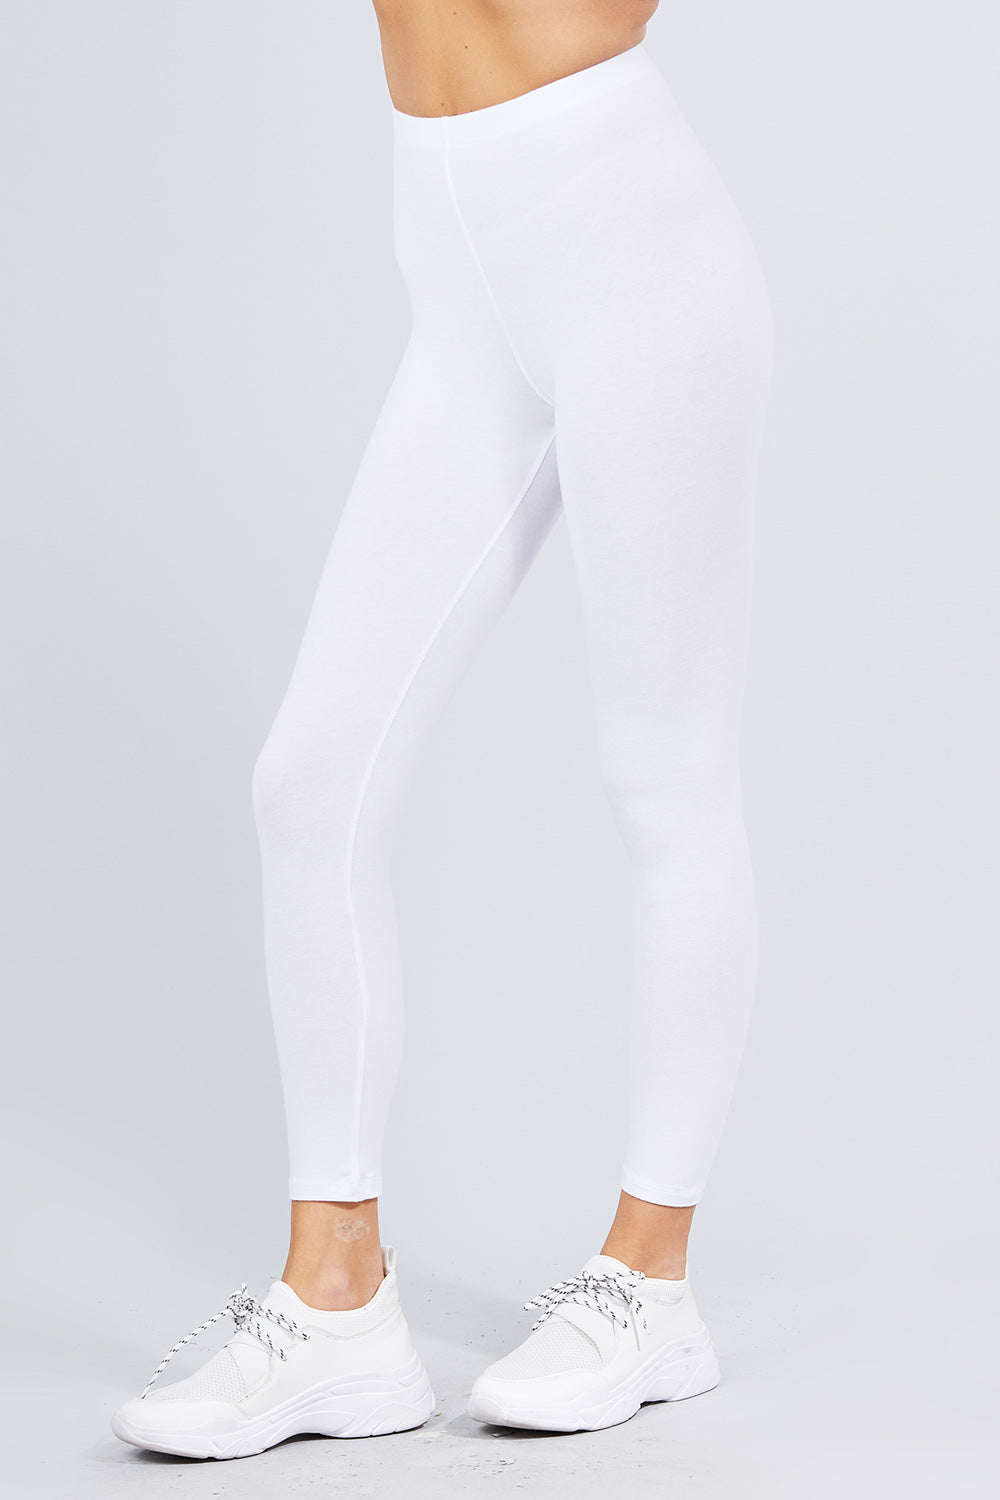 Shaping slimming leggings PUSH UP STREET COLLECTION K127 white MITARE Size  S Color White